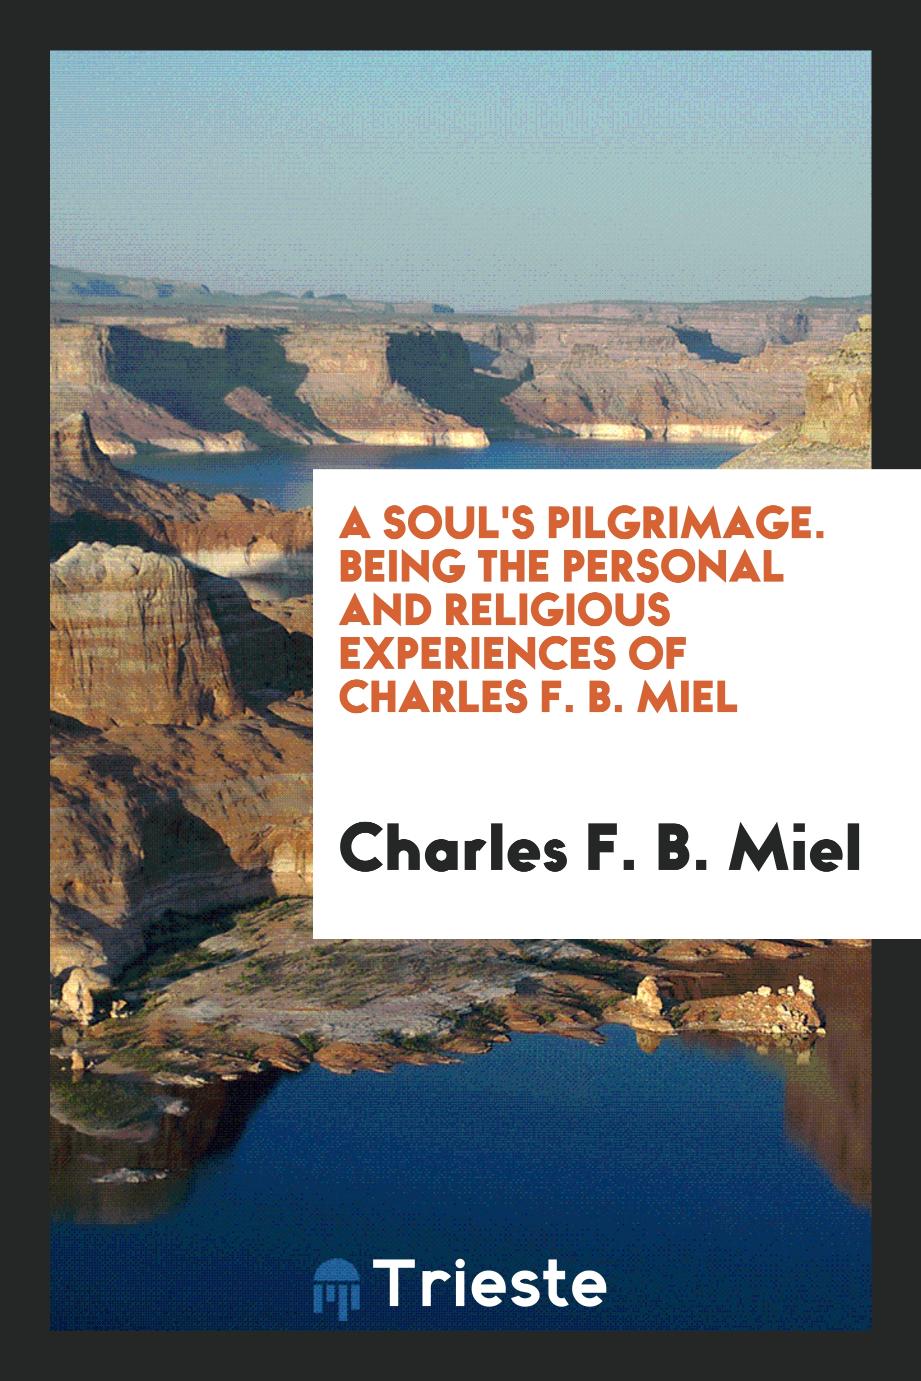 A Soul's Pilgrimage. Being the Personal and Religious Experiences of Charles F. B. Miel